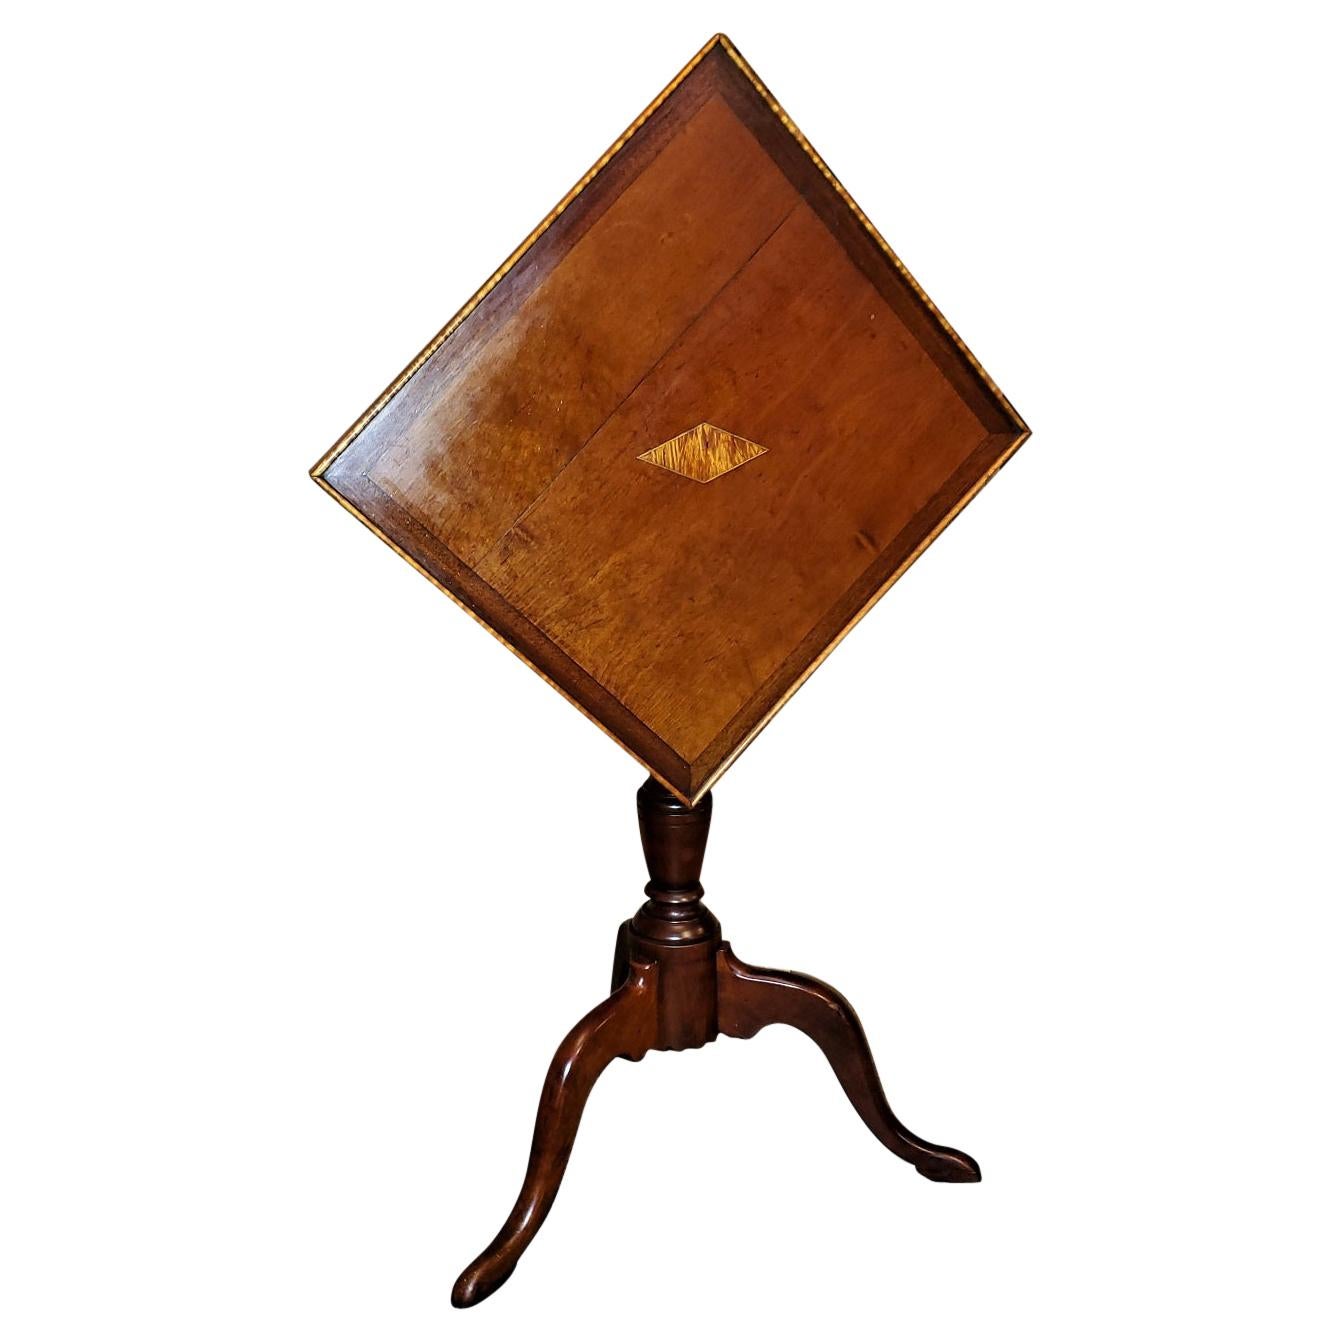 Early 19th Century American Sheraton Tilt-Top Table of Neat Proportions